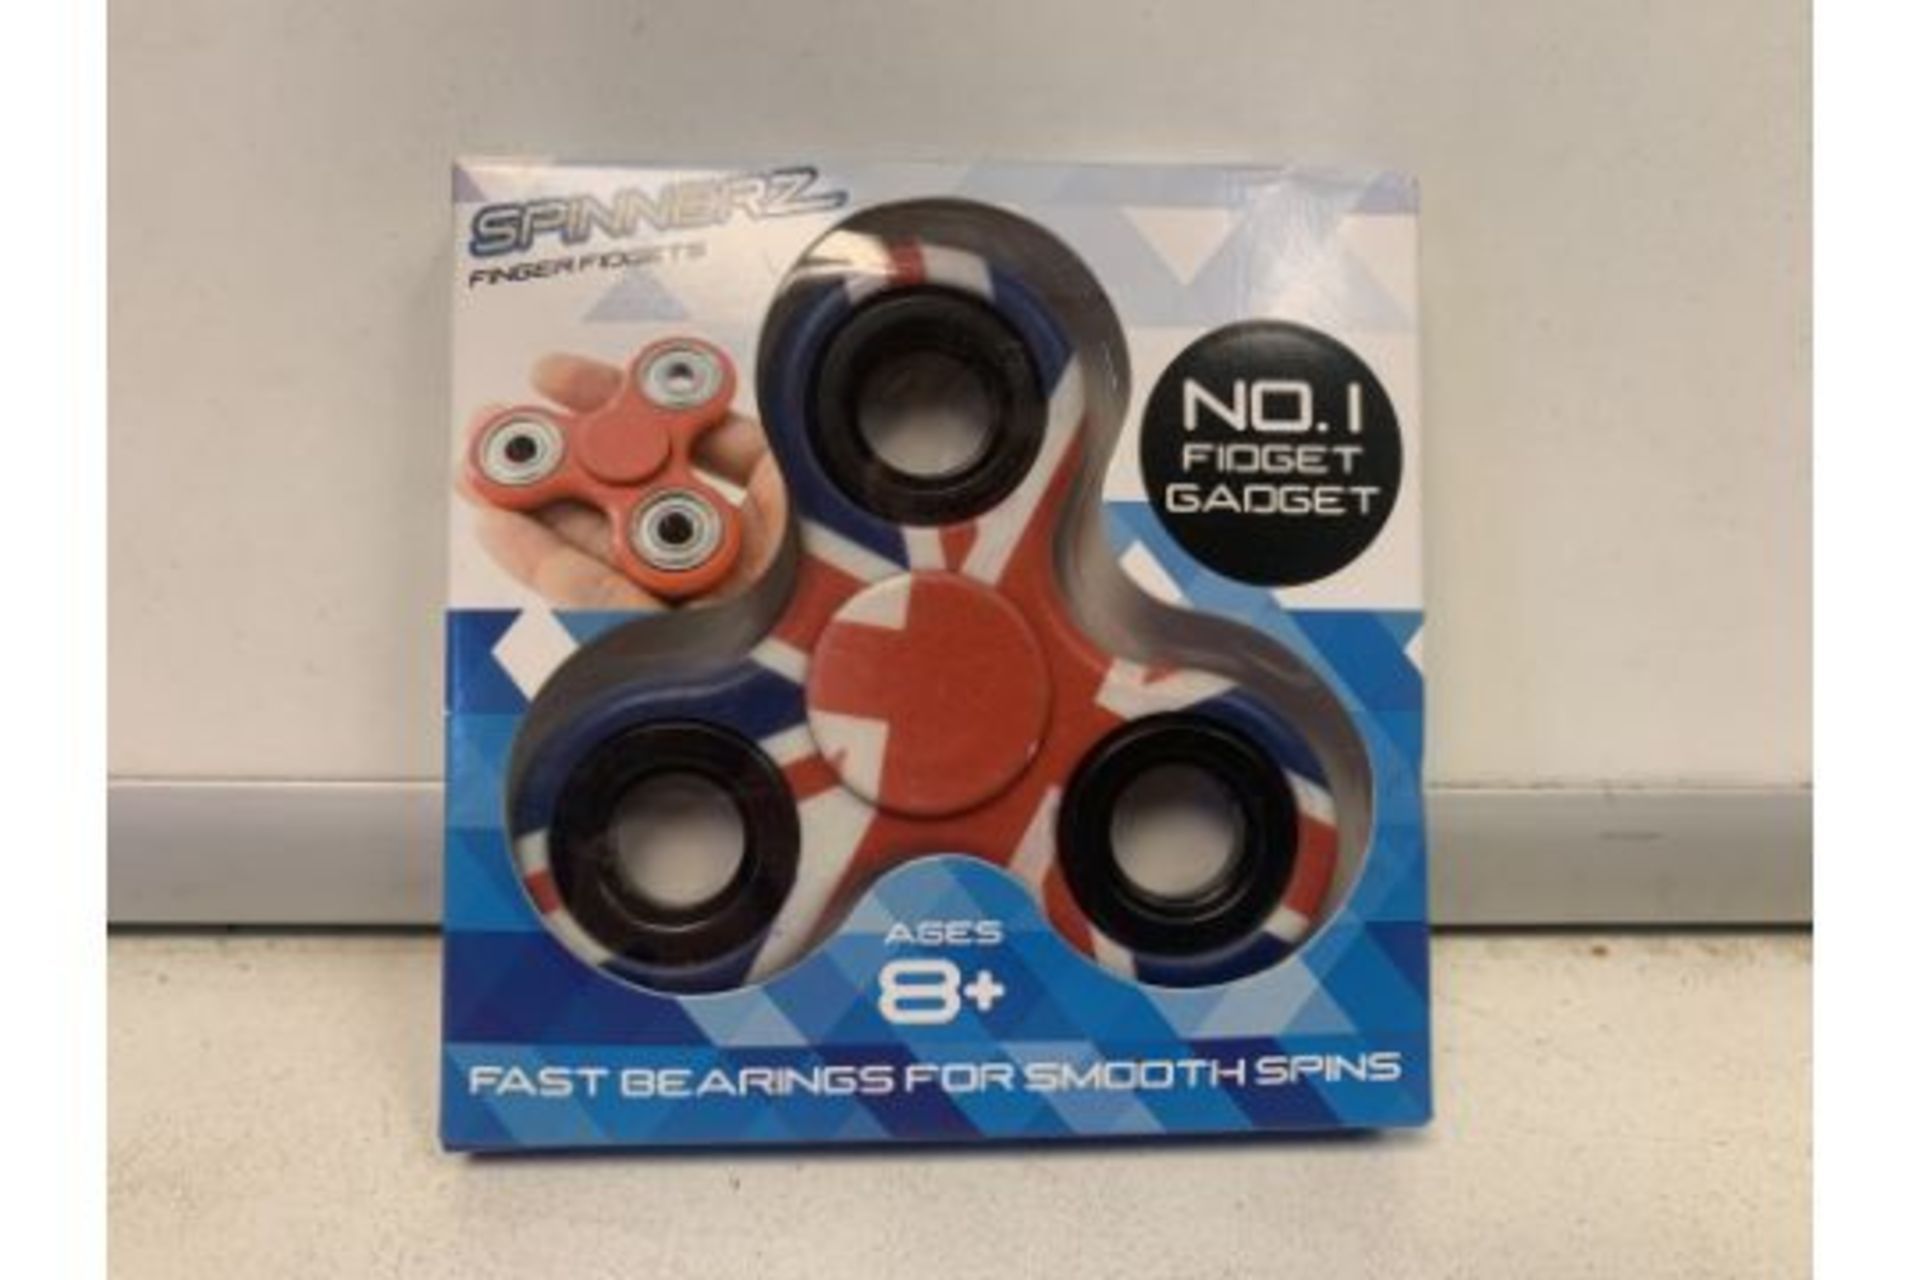 100 X Brand New Fidget Spinners in Various Designs r16